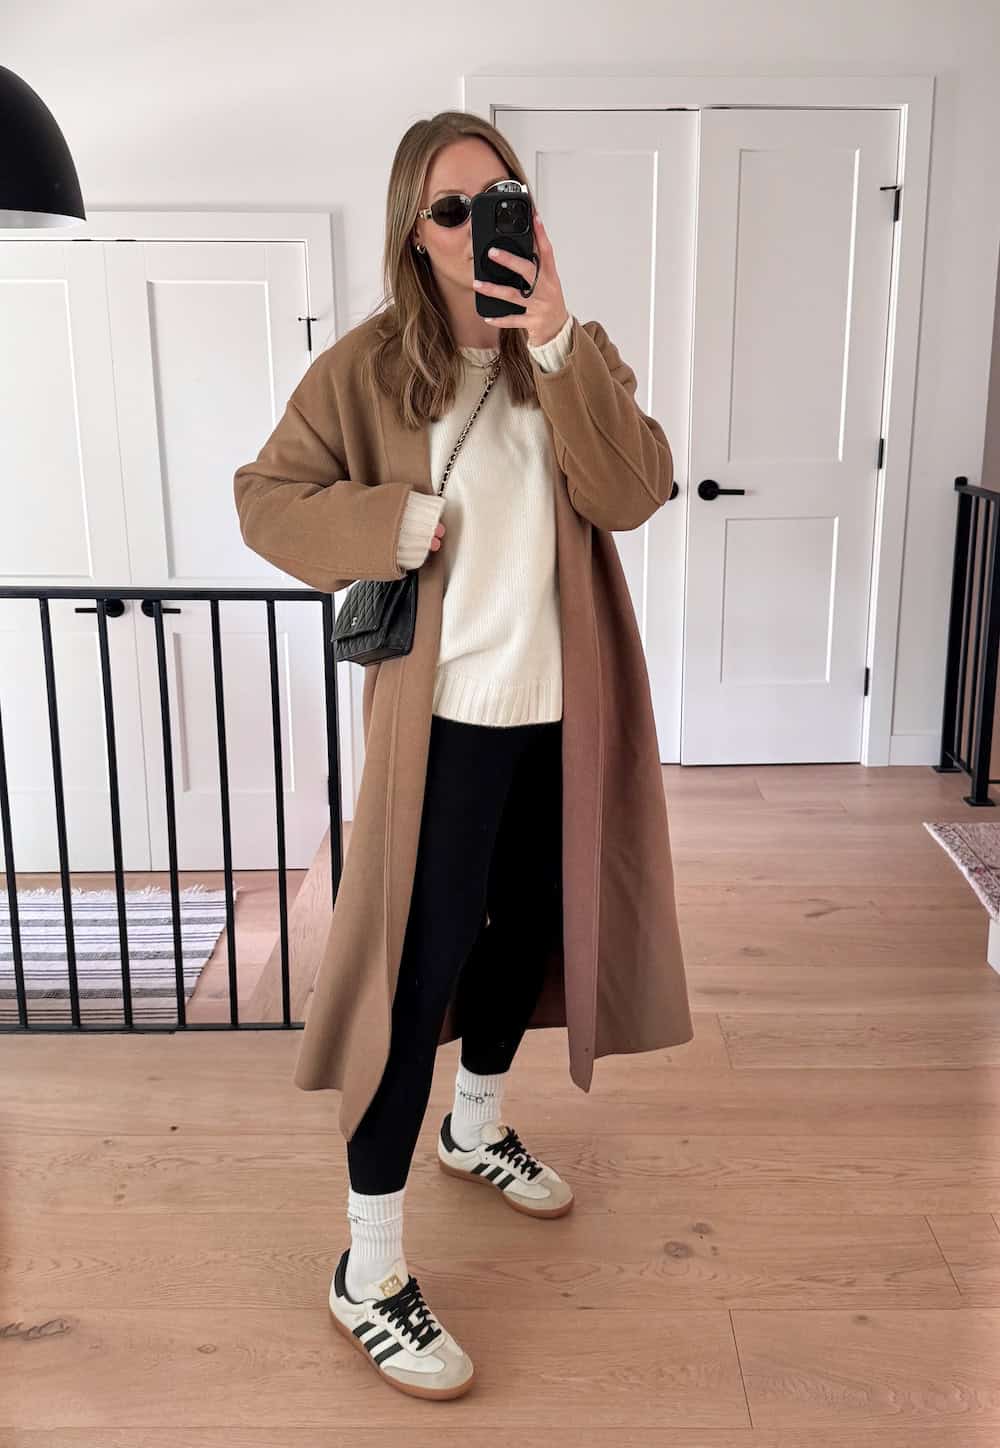 Christal wearing leggings with a white sweater and a long, camel colored coat with tall white socks and sneakers.